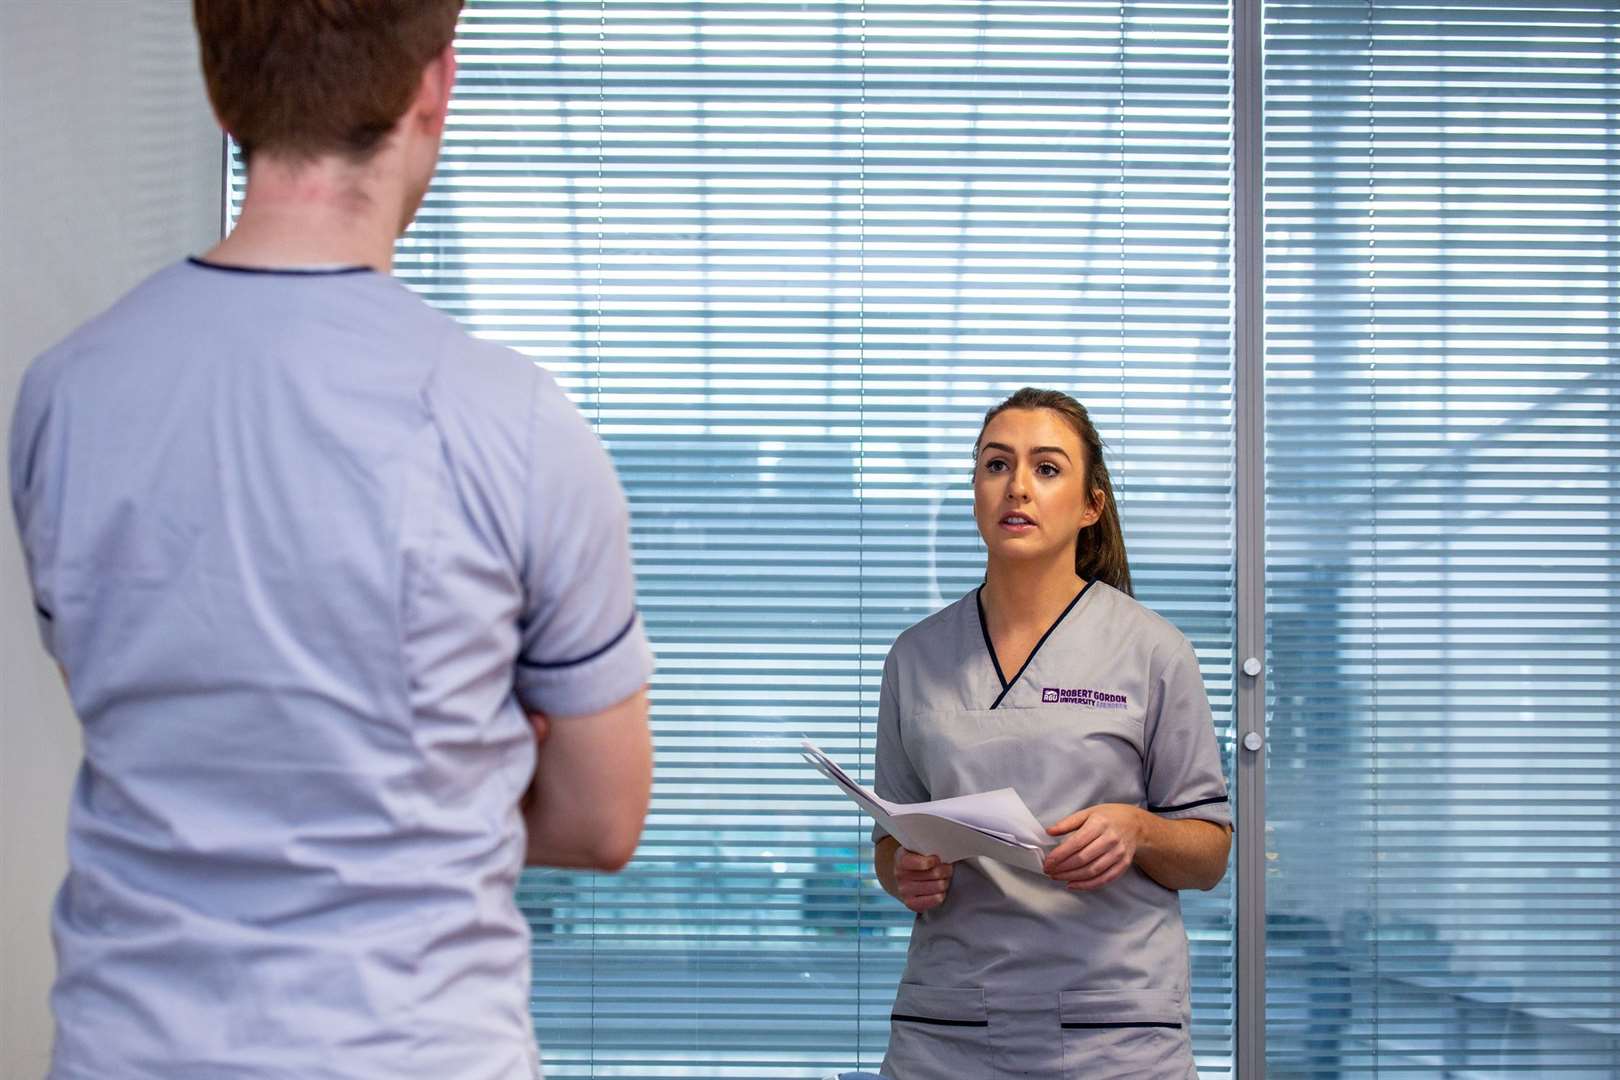 The demands of digital healthcare are at the heart of a new toolkit for nurses produced by RGU.